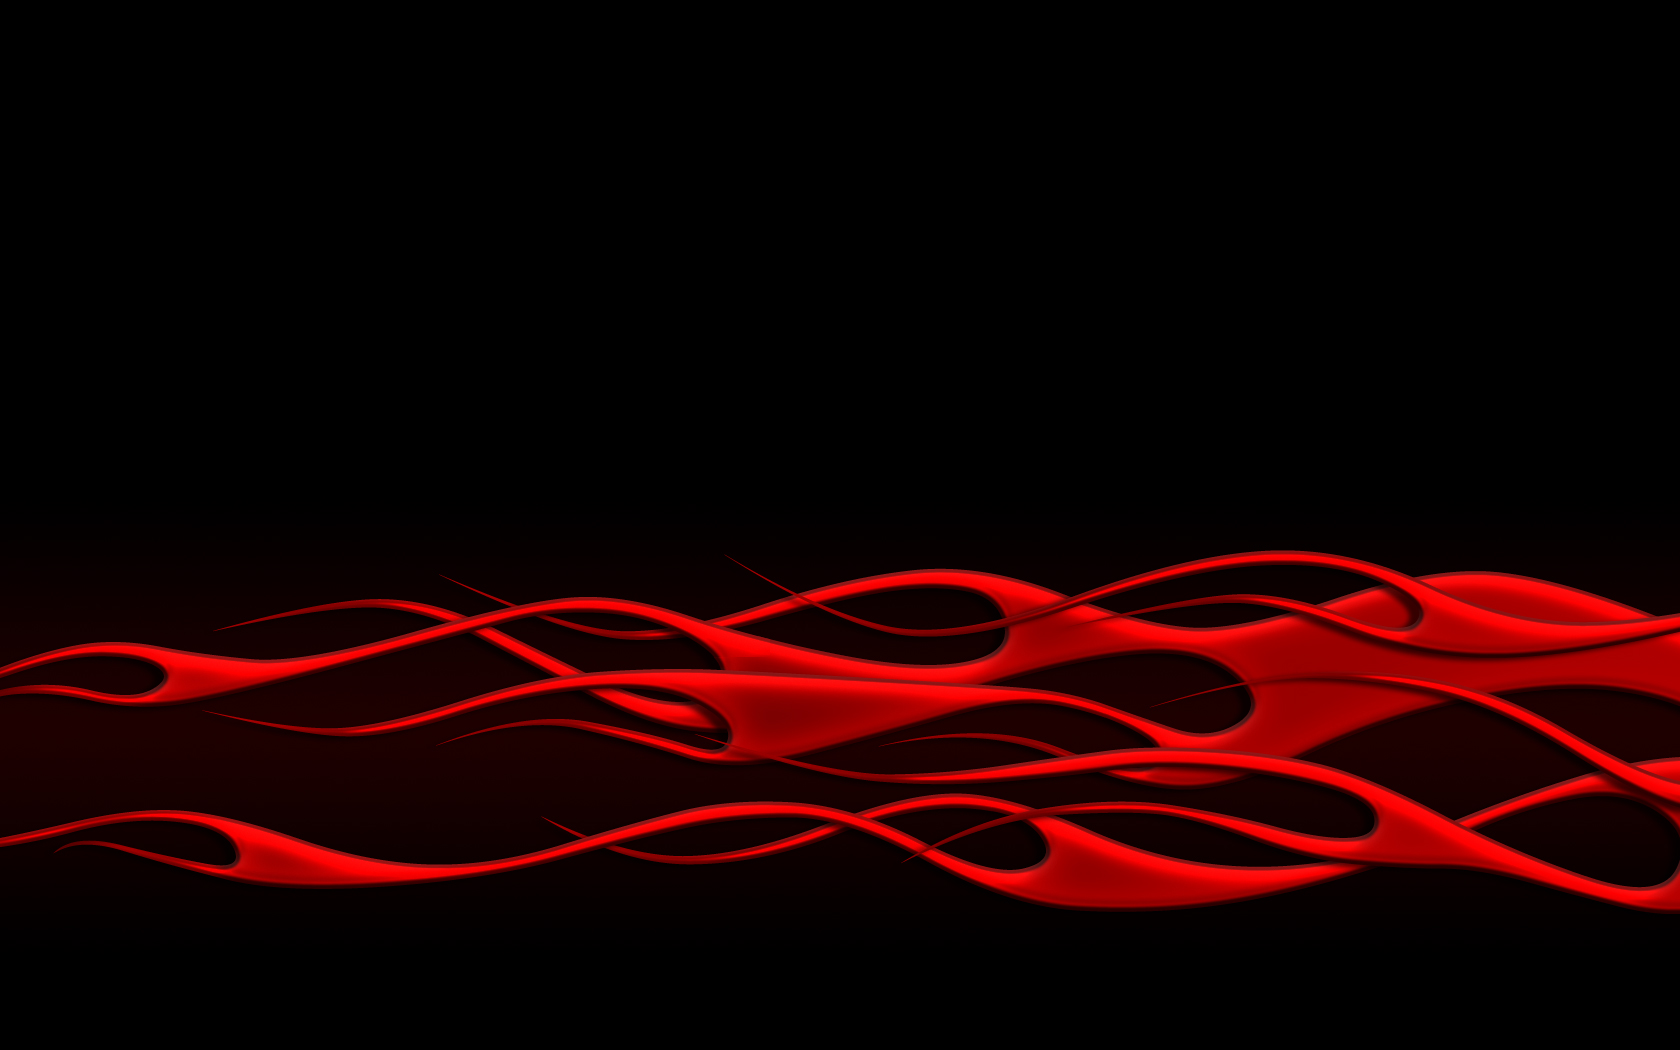 Red Flames Wallpaper On Black By Jbensch